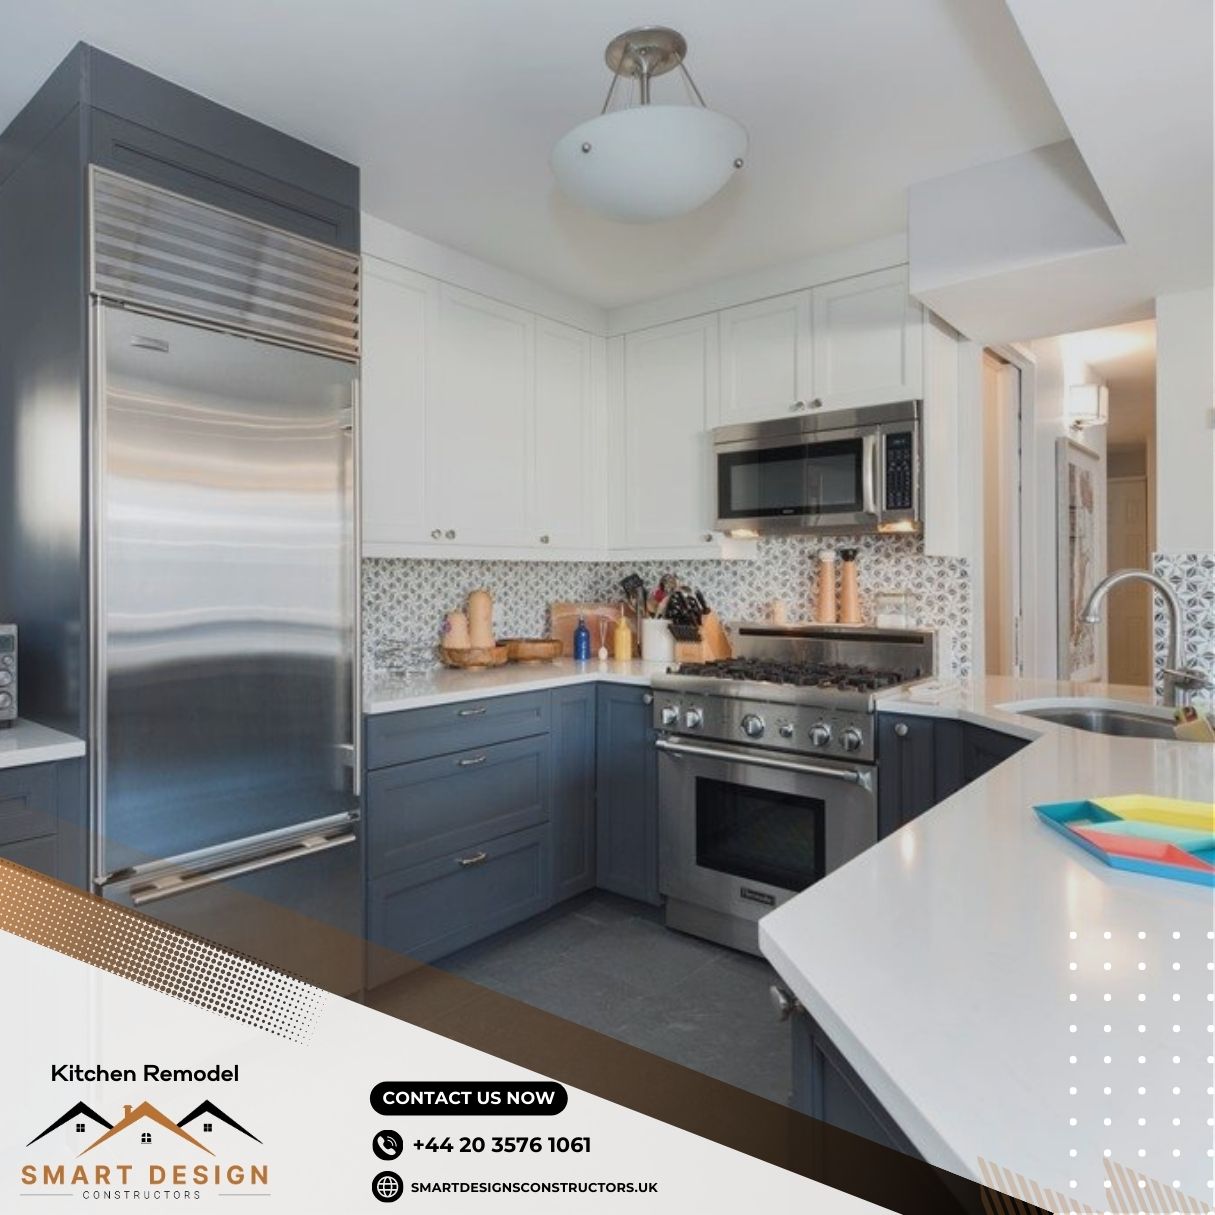 You are currently viewing Kitchen Remodel in London can be an intricate procedure